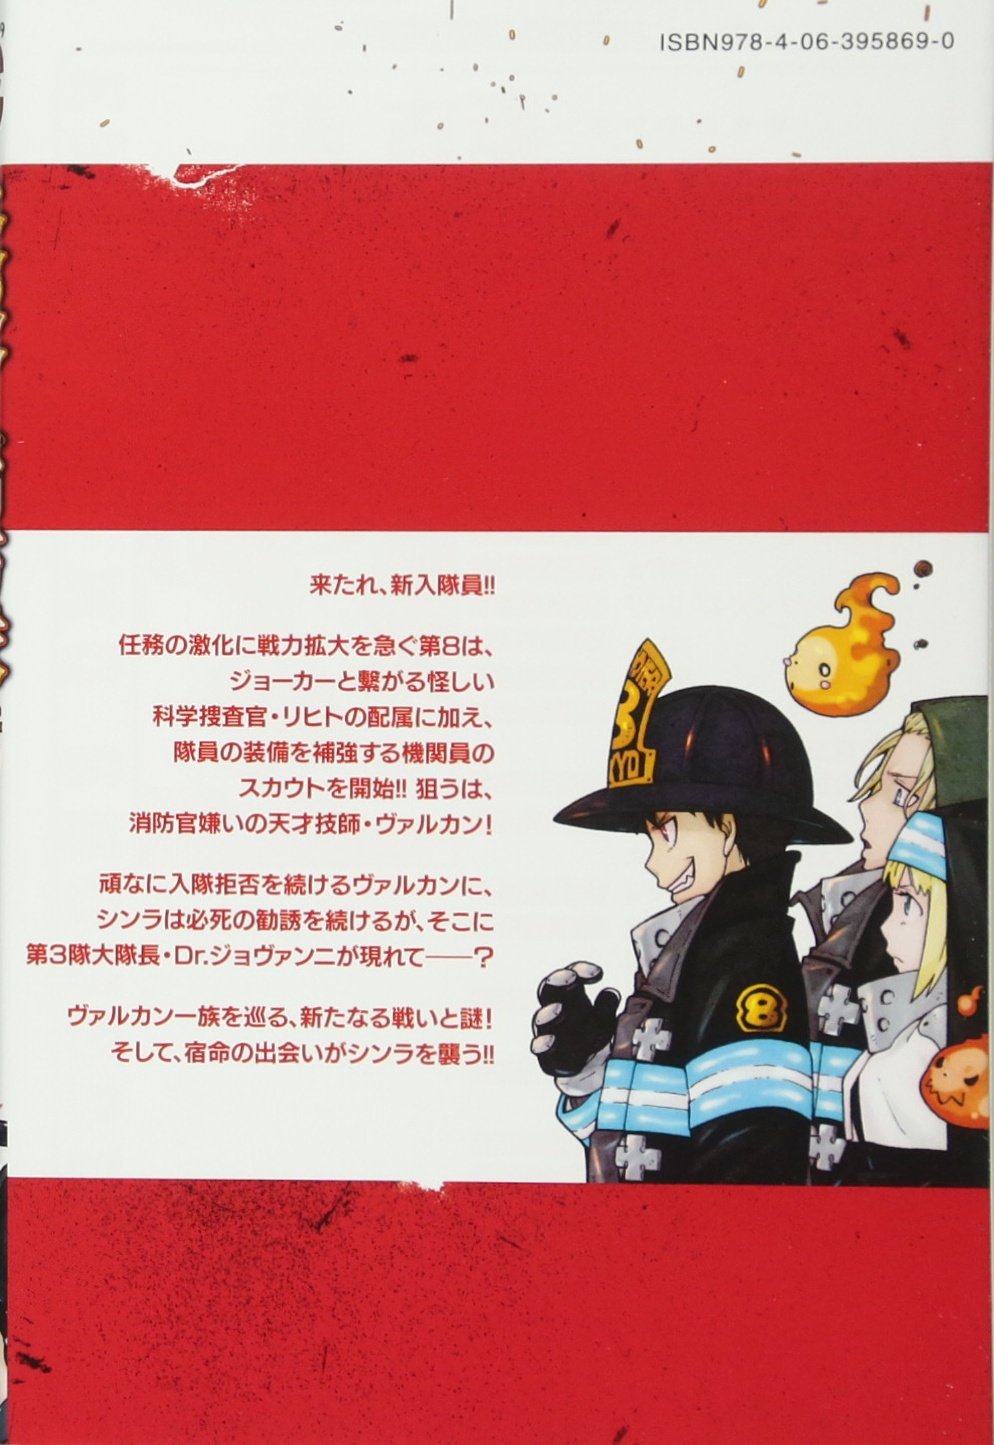 Fire Force: Fire Force 7 (Series #7) (Paperback) 